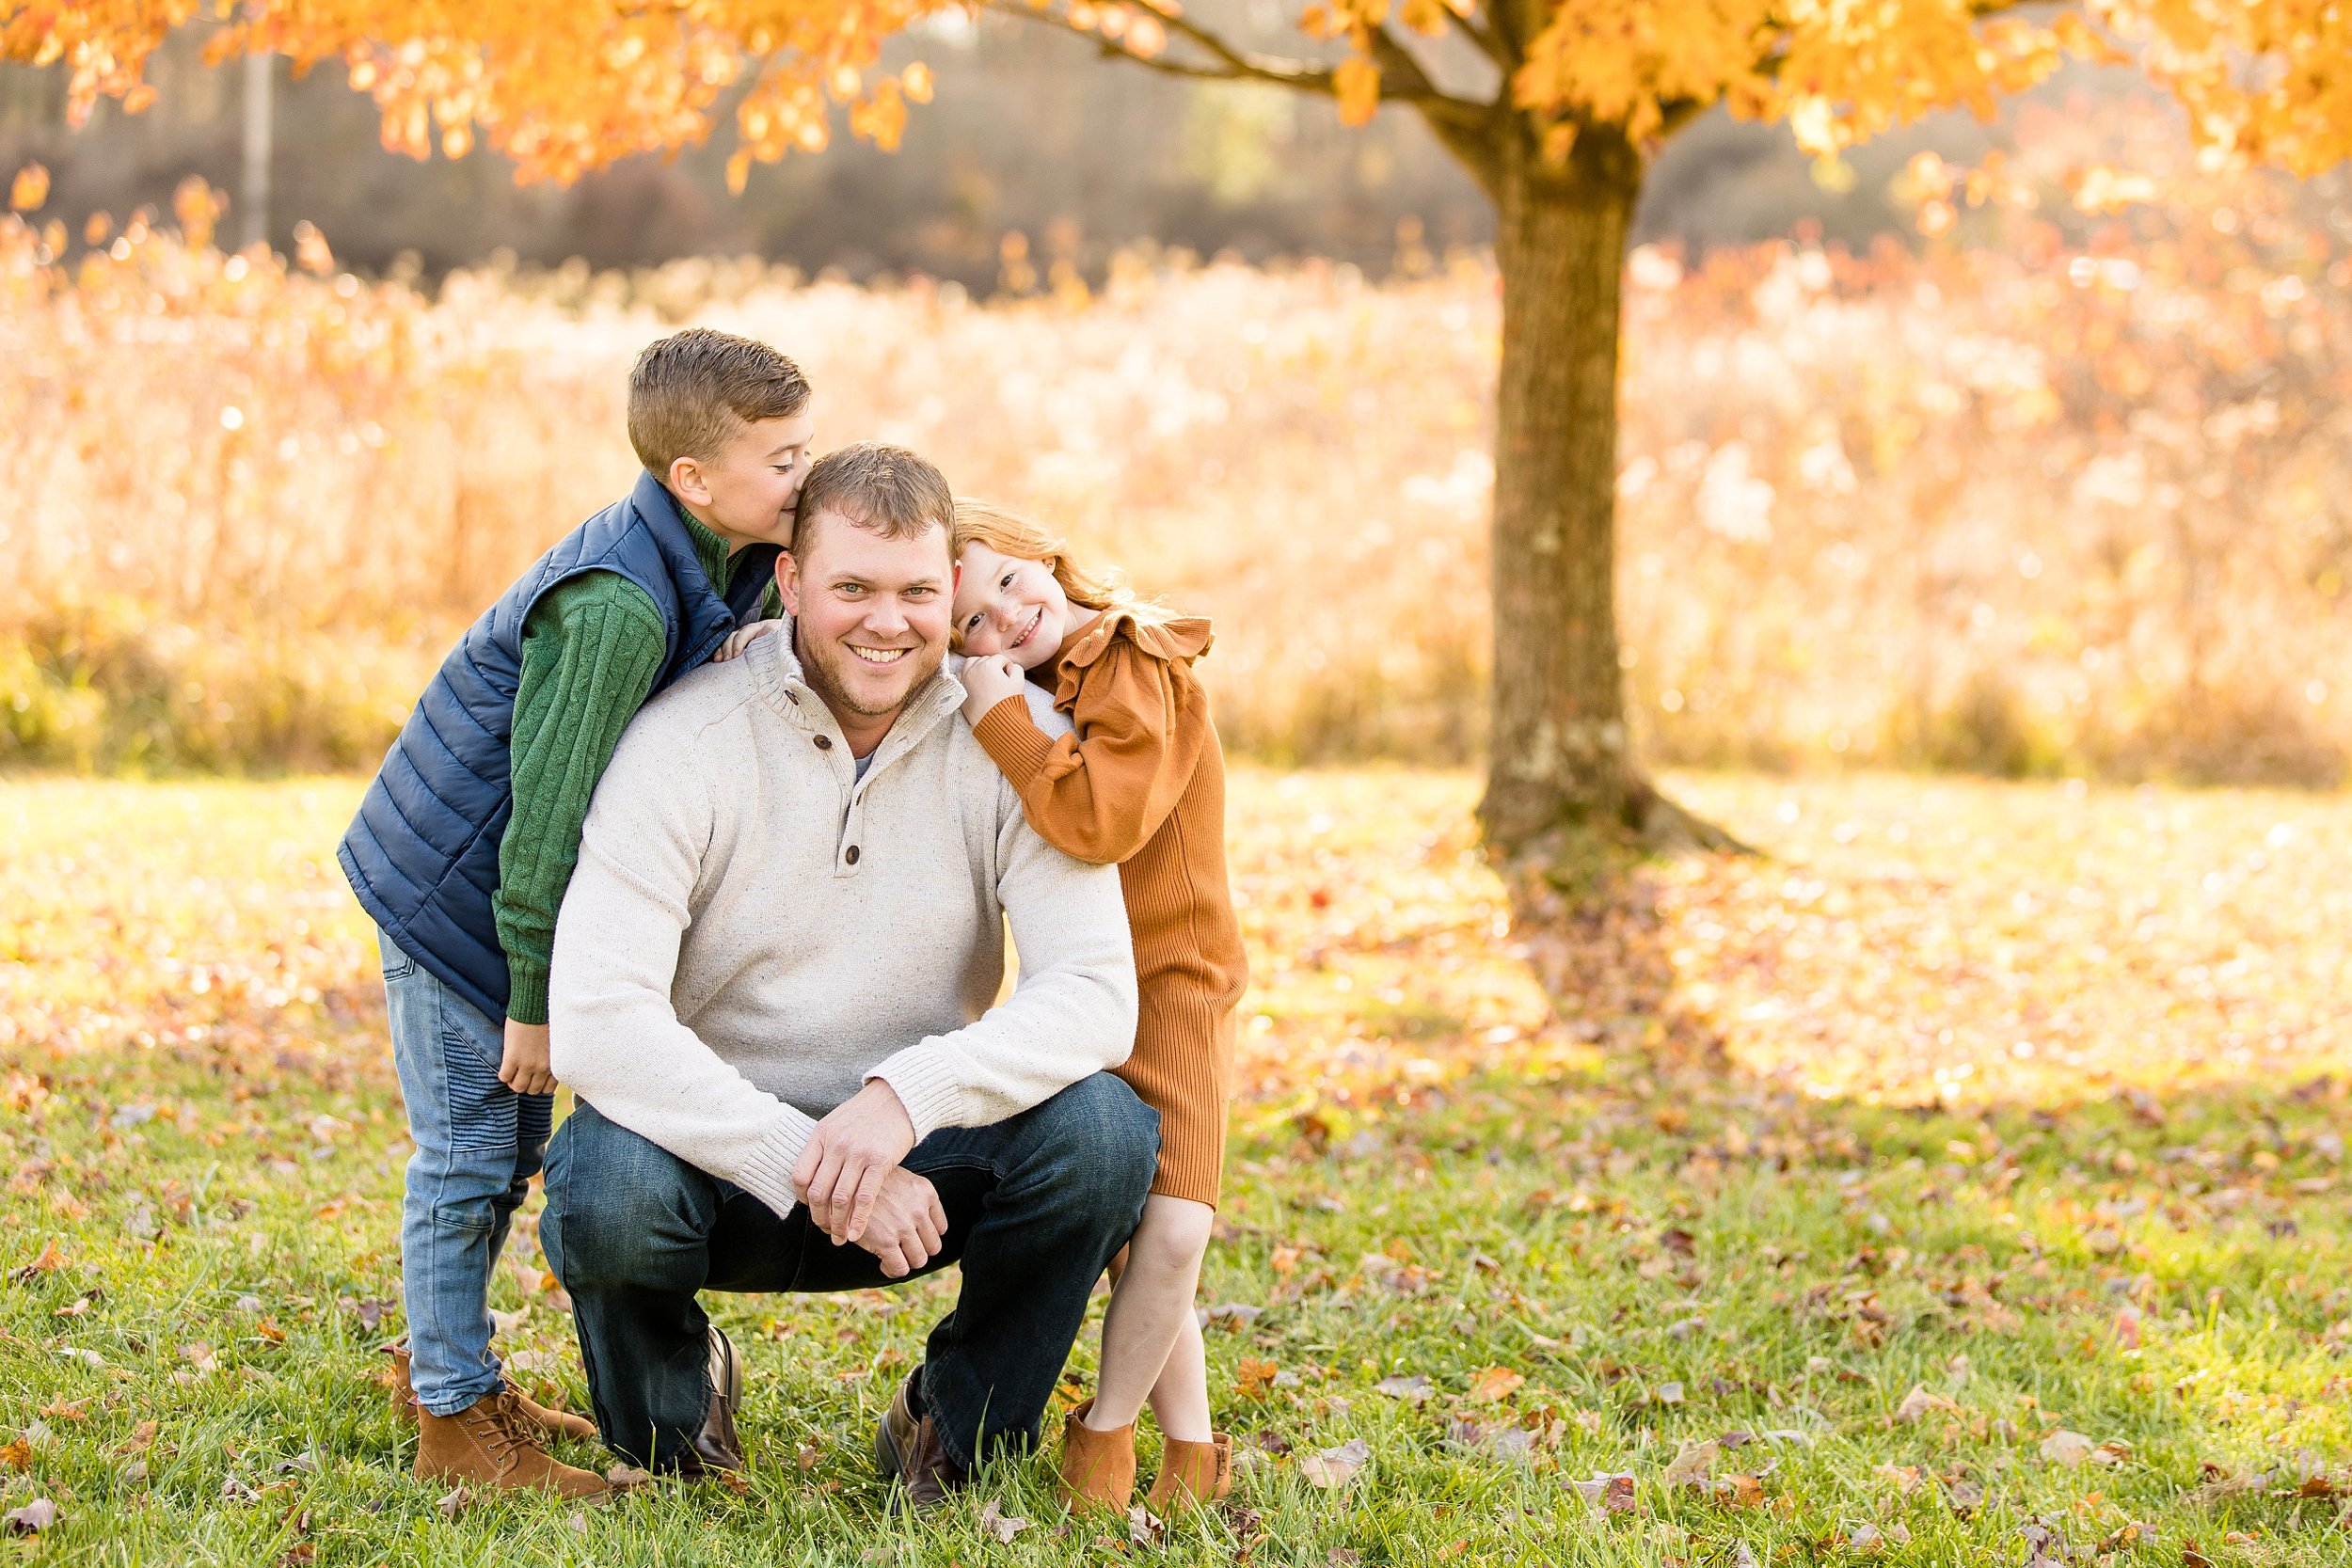 moraine state park family photos, pittsburgh family photographer, cranberry township family photographer, zelienople family photographer, fall family photos pittsburgh